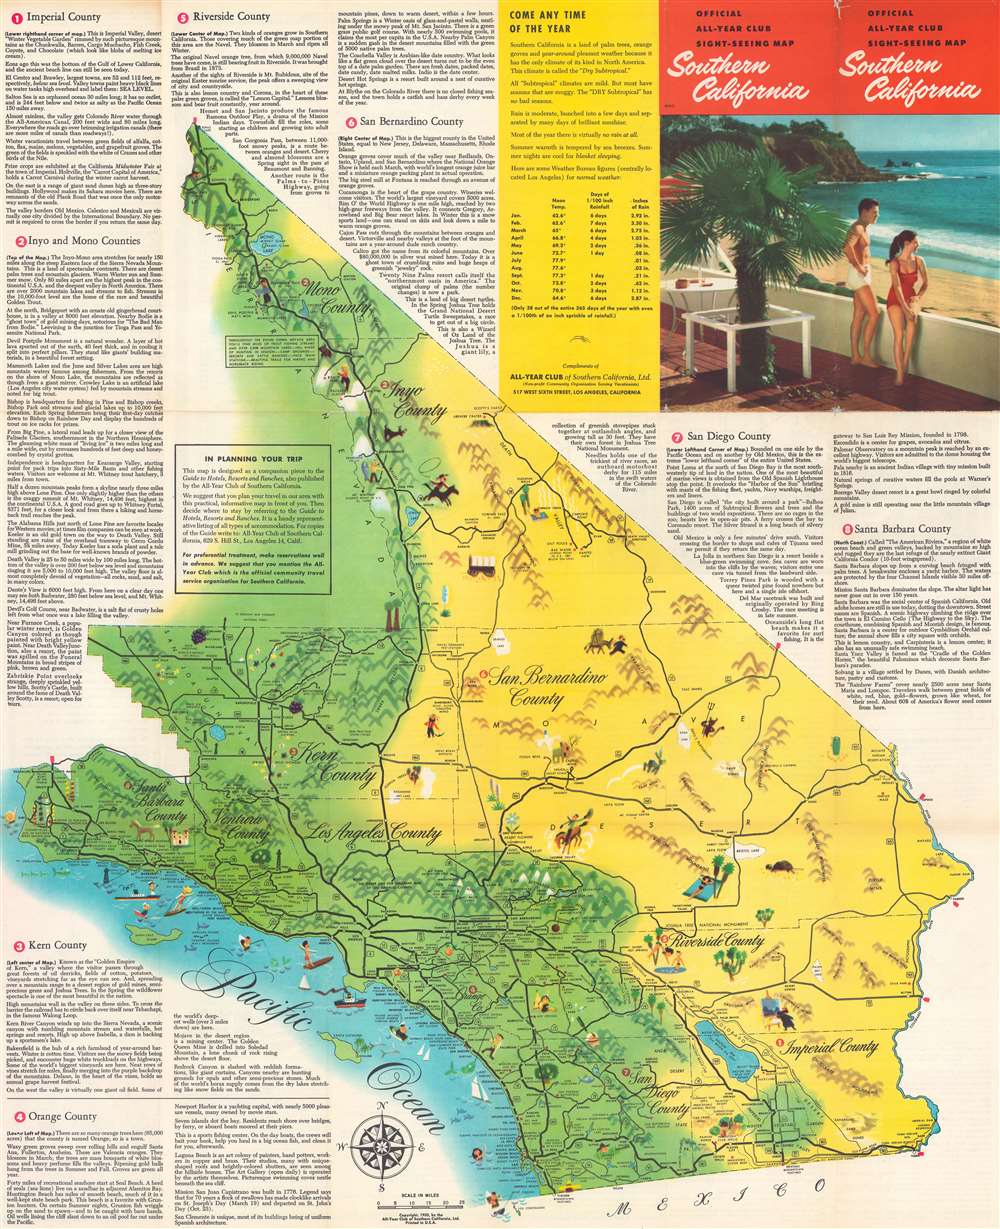 1953 All-Year Club Pictorial Tourist Map of Southern California